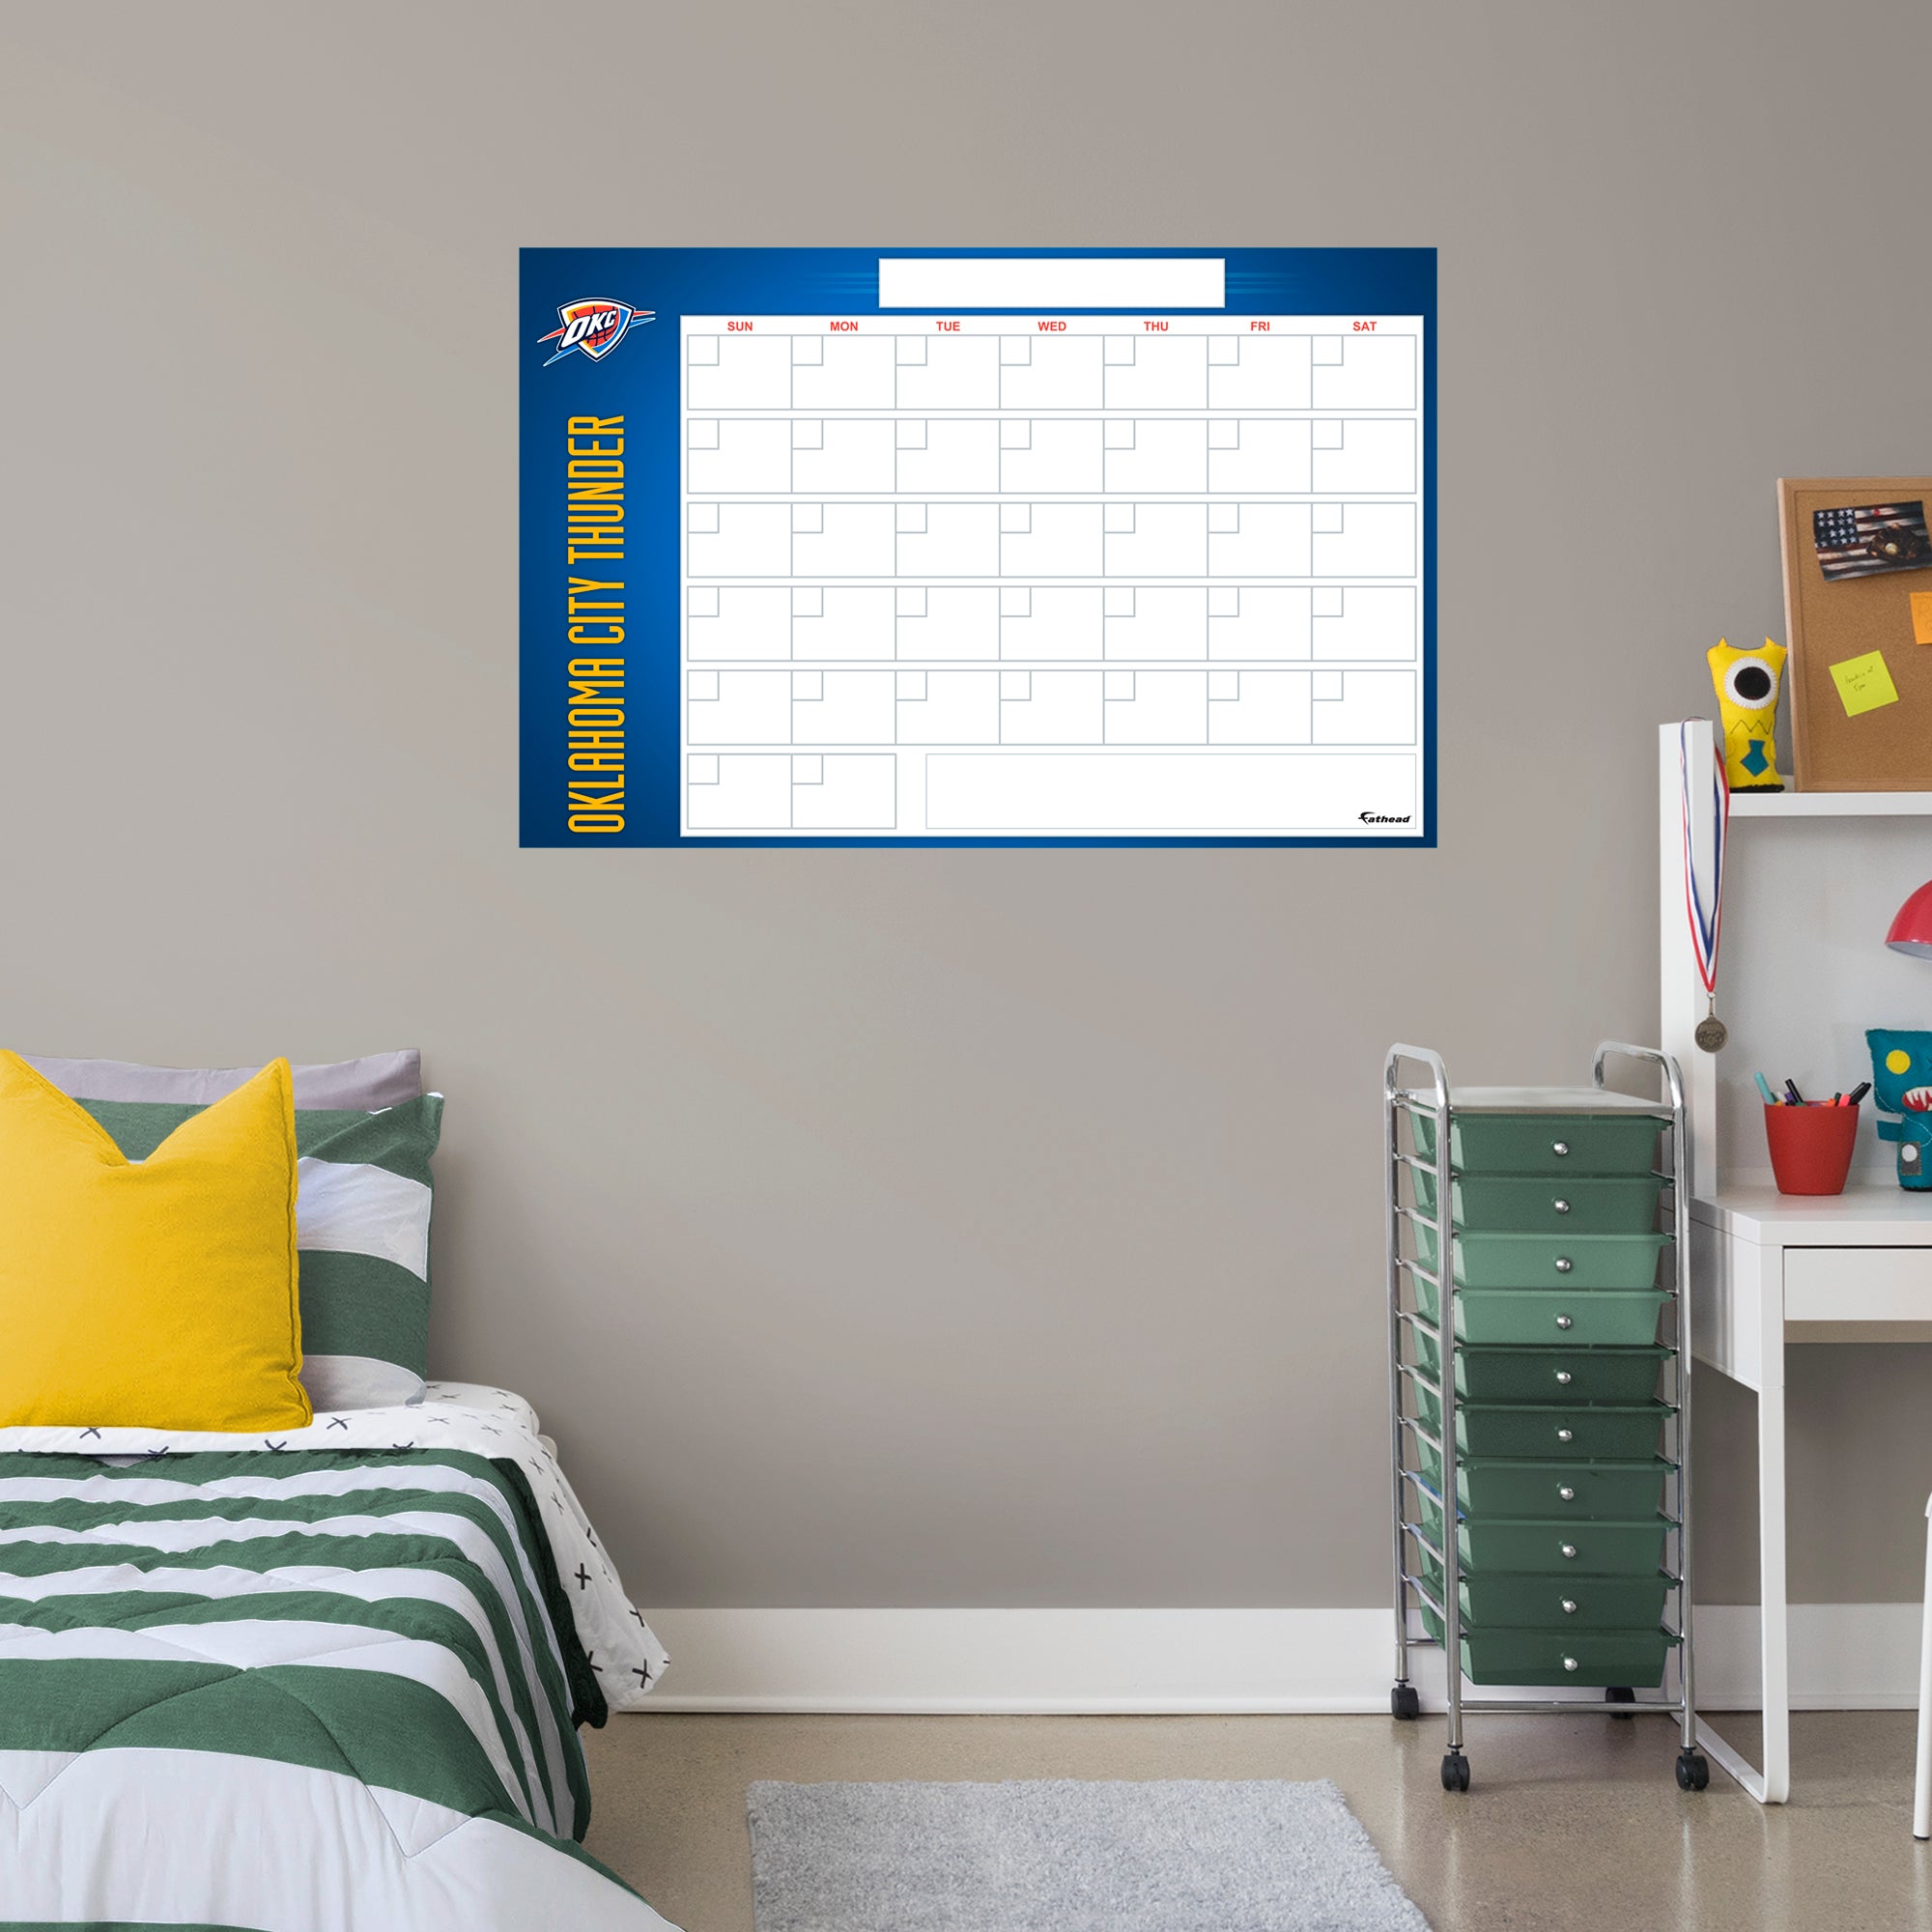 Oklahoma City Thunder Dry Erase Calendar - Officially Licensed NBA Removable Wall Decal Giant Decal (34"W x 52"H) by Fathead | V